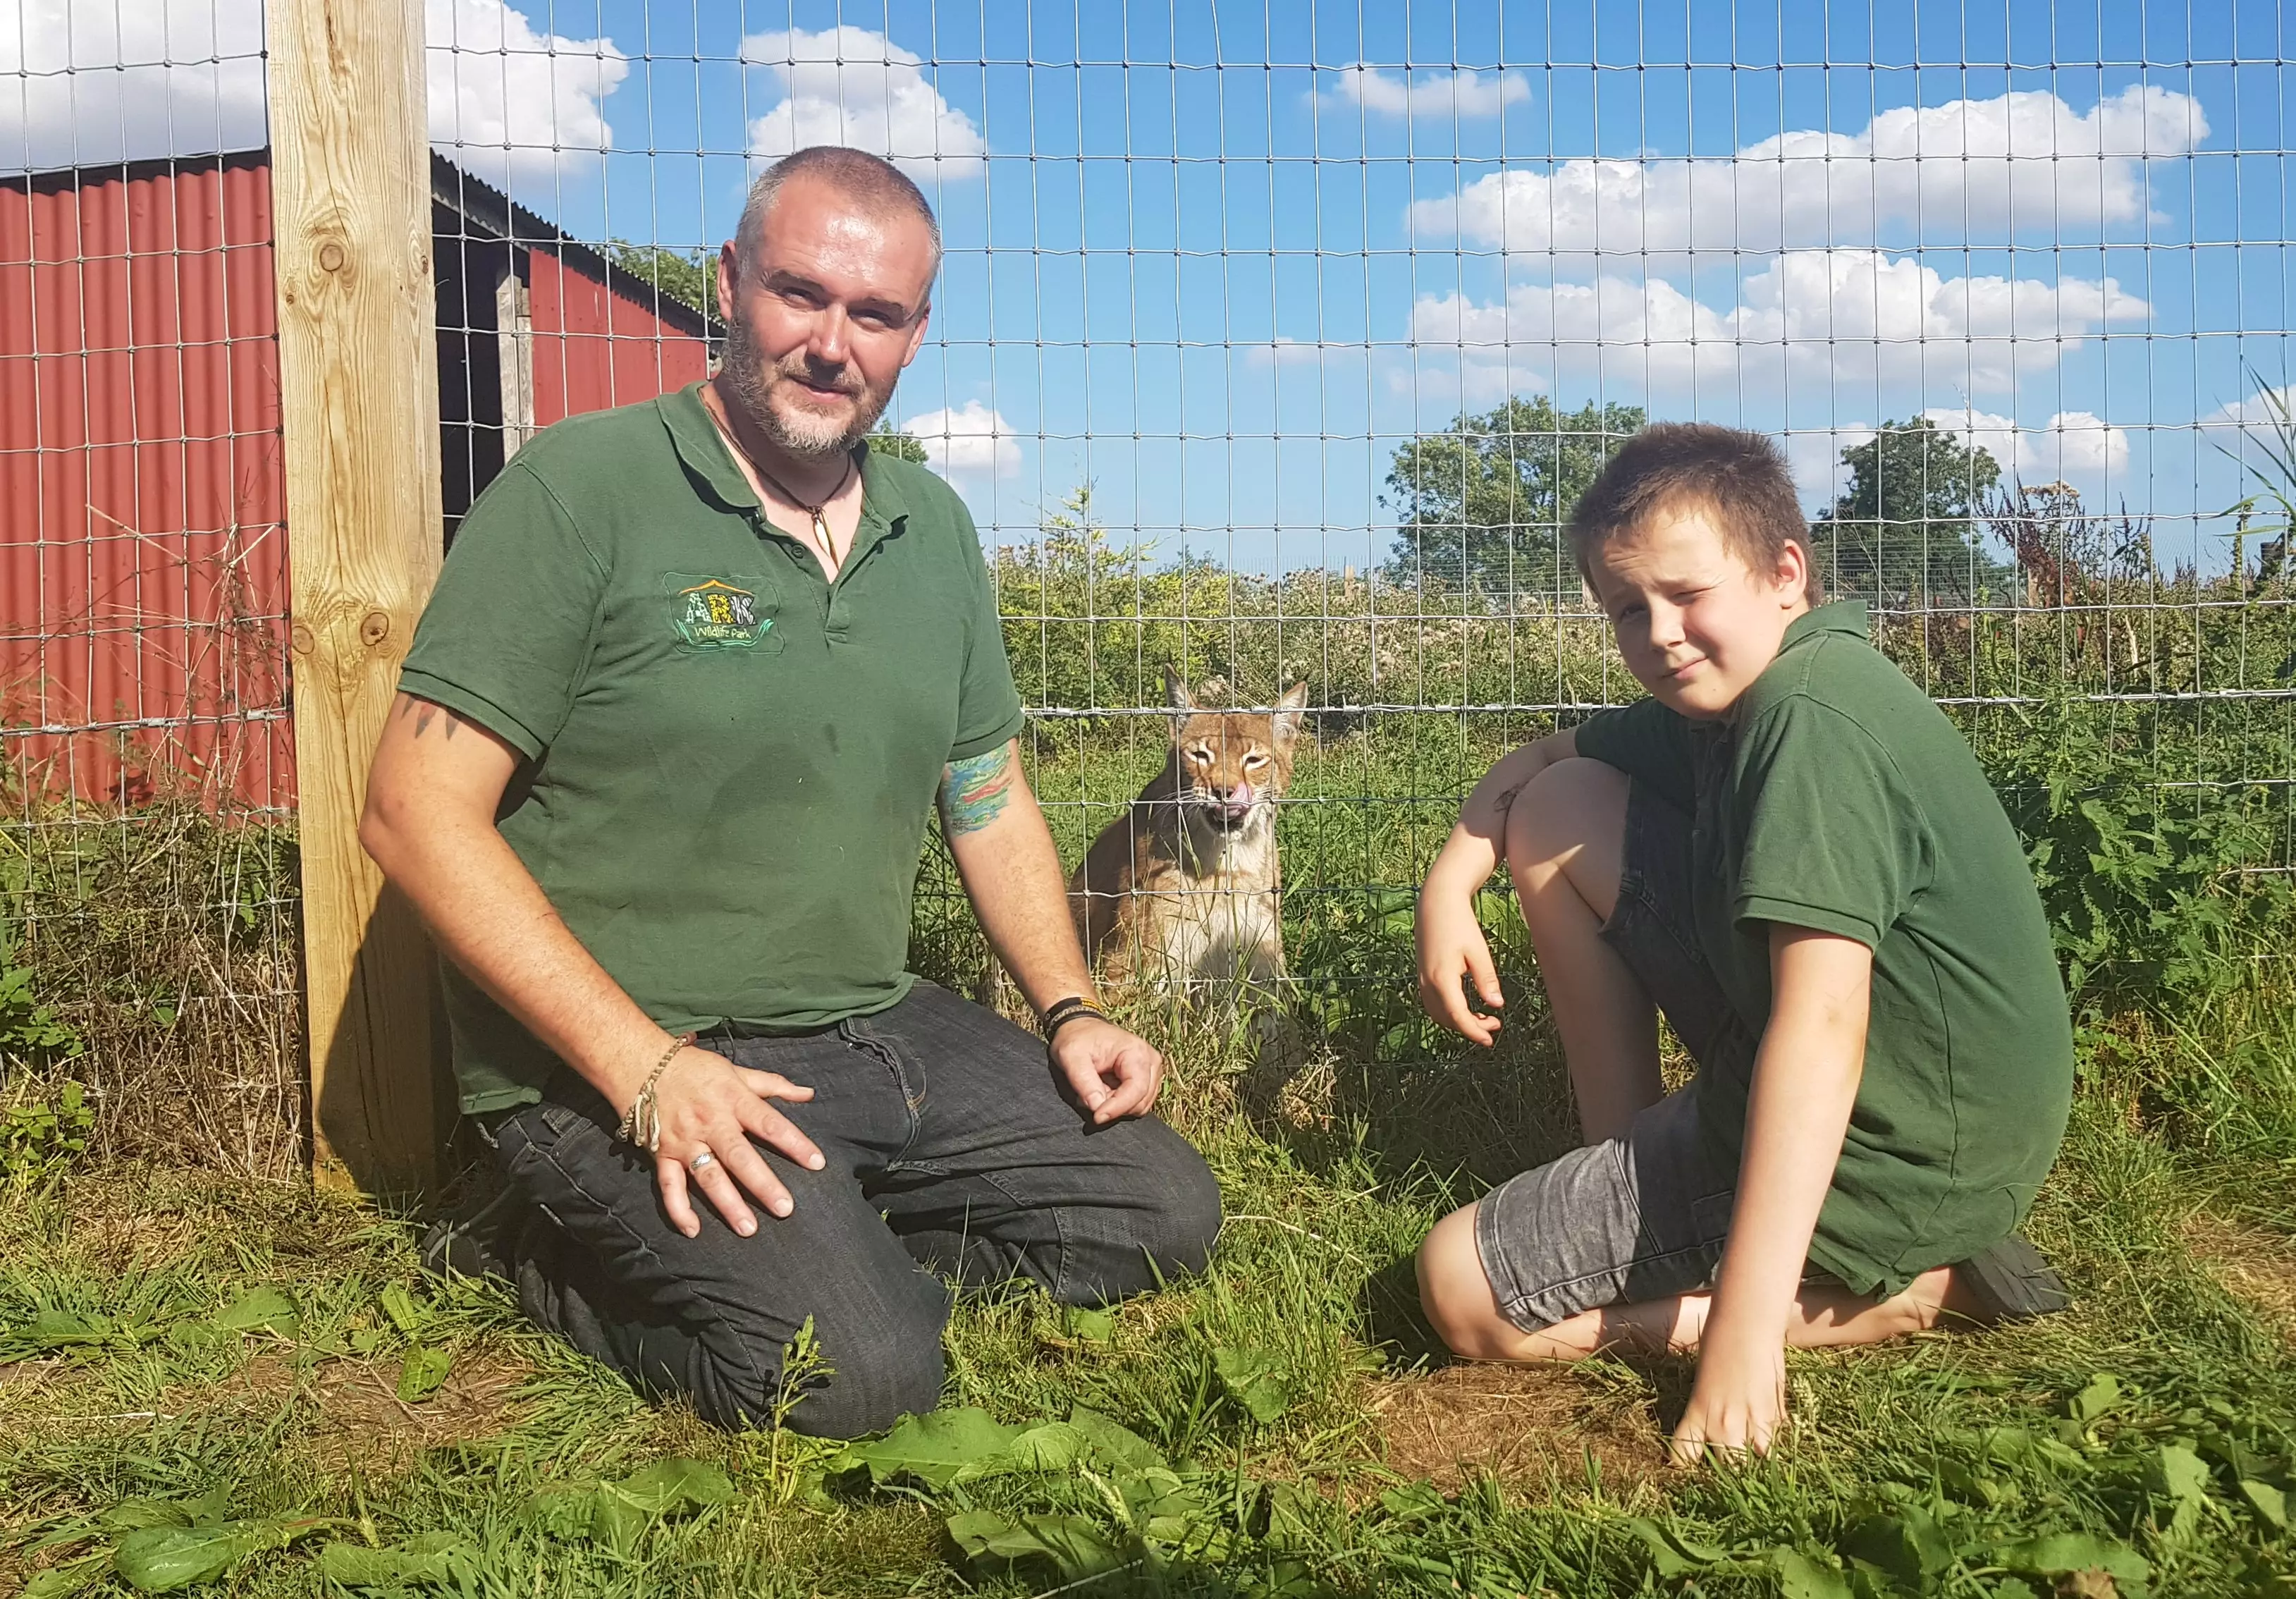 Jamie, pictured with son Josh, takes care of several wild cats and reptiles.